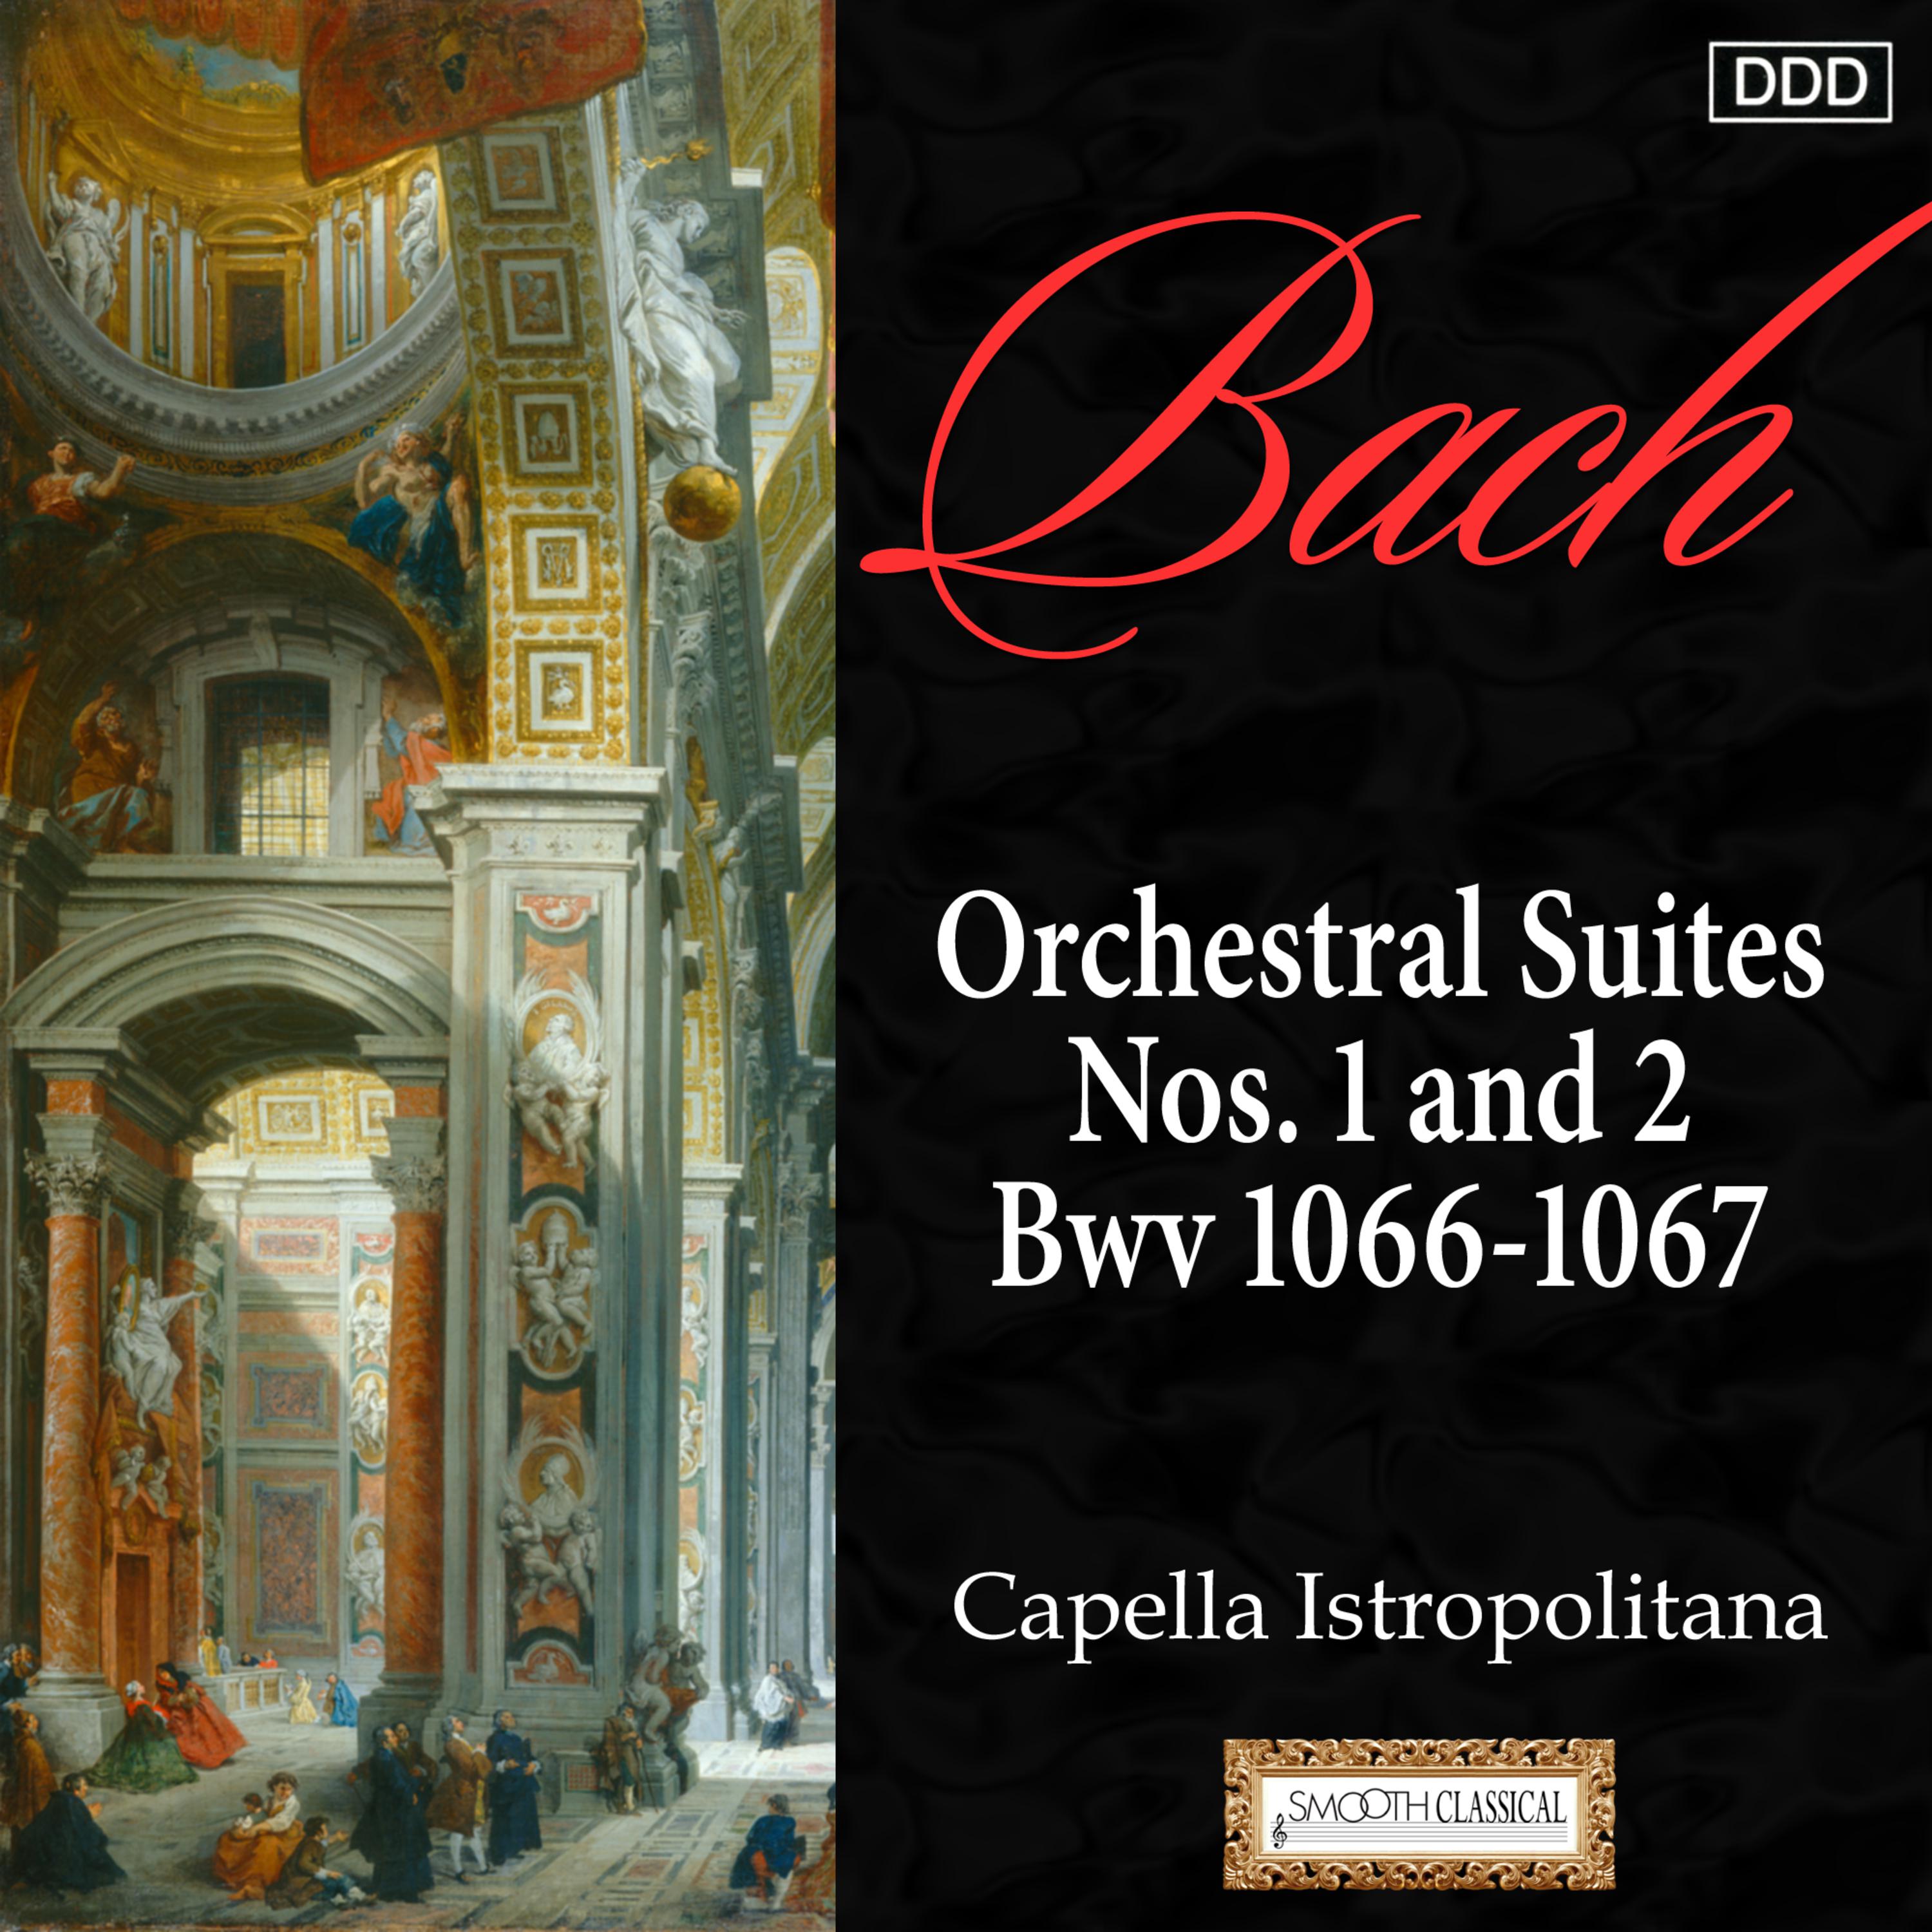 Orchestral Suite No. 1 in C Major, BWV 1066: I. Ouverture